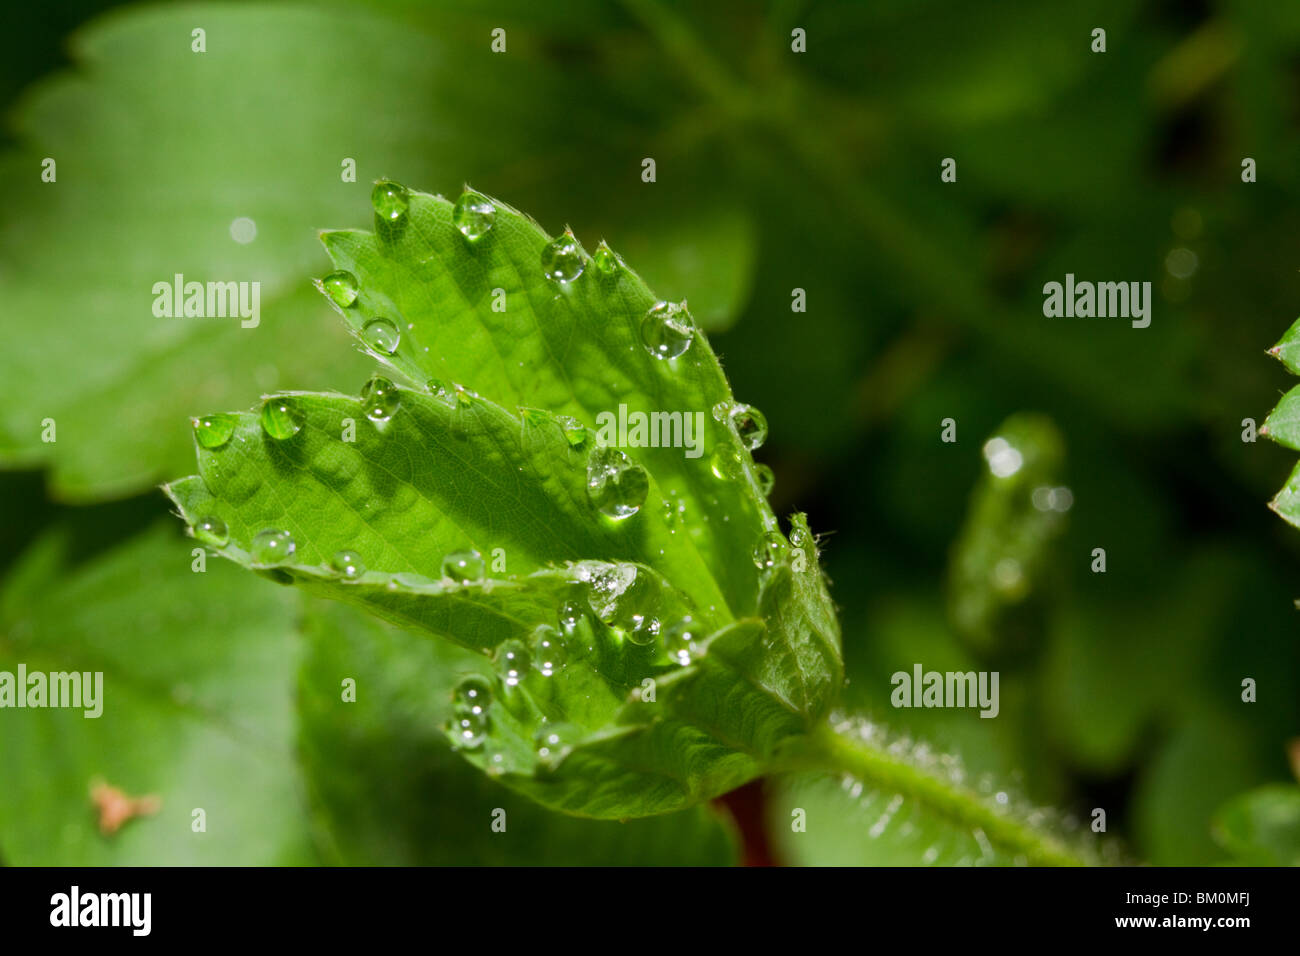 Guttation (drops of water on the special pores of plant leaf) Stock Photo